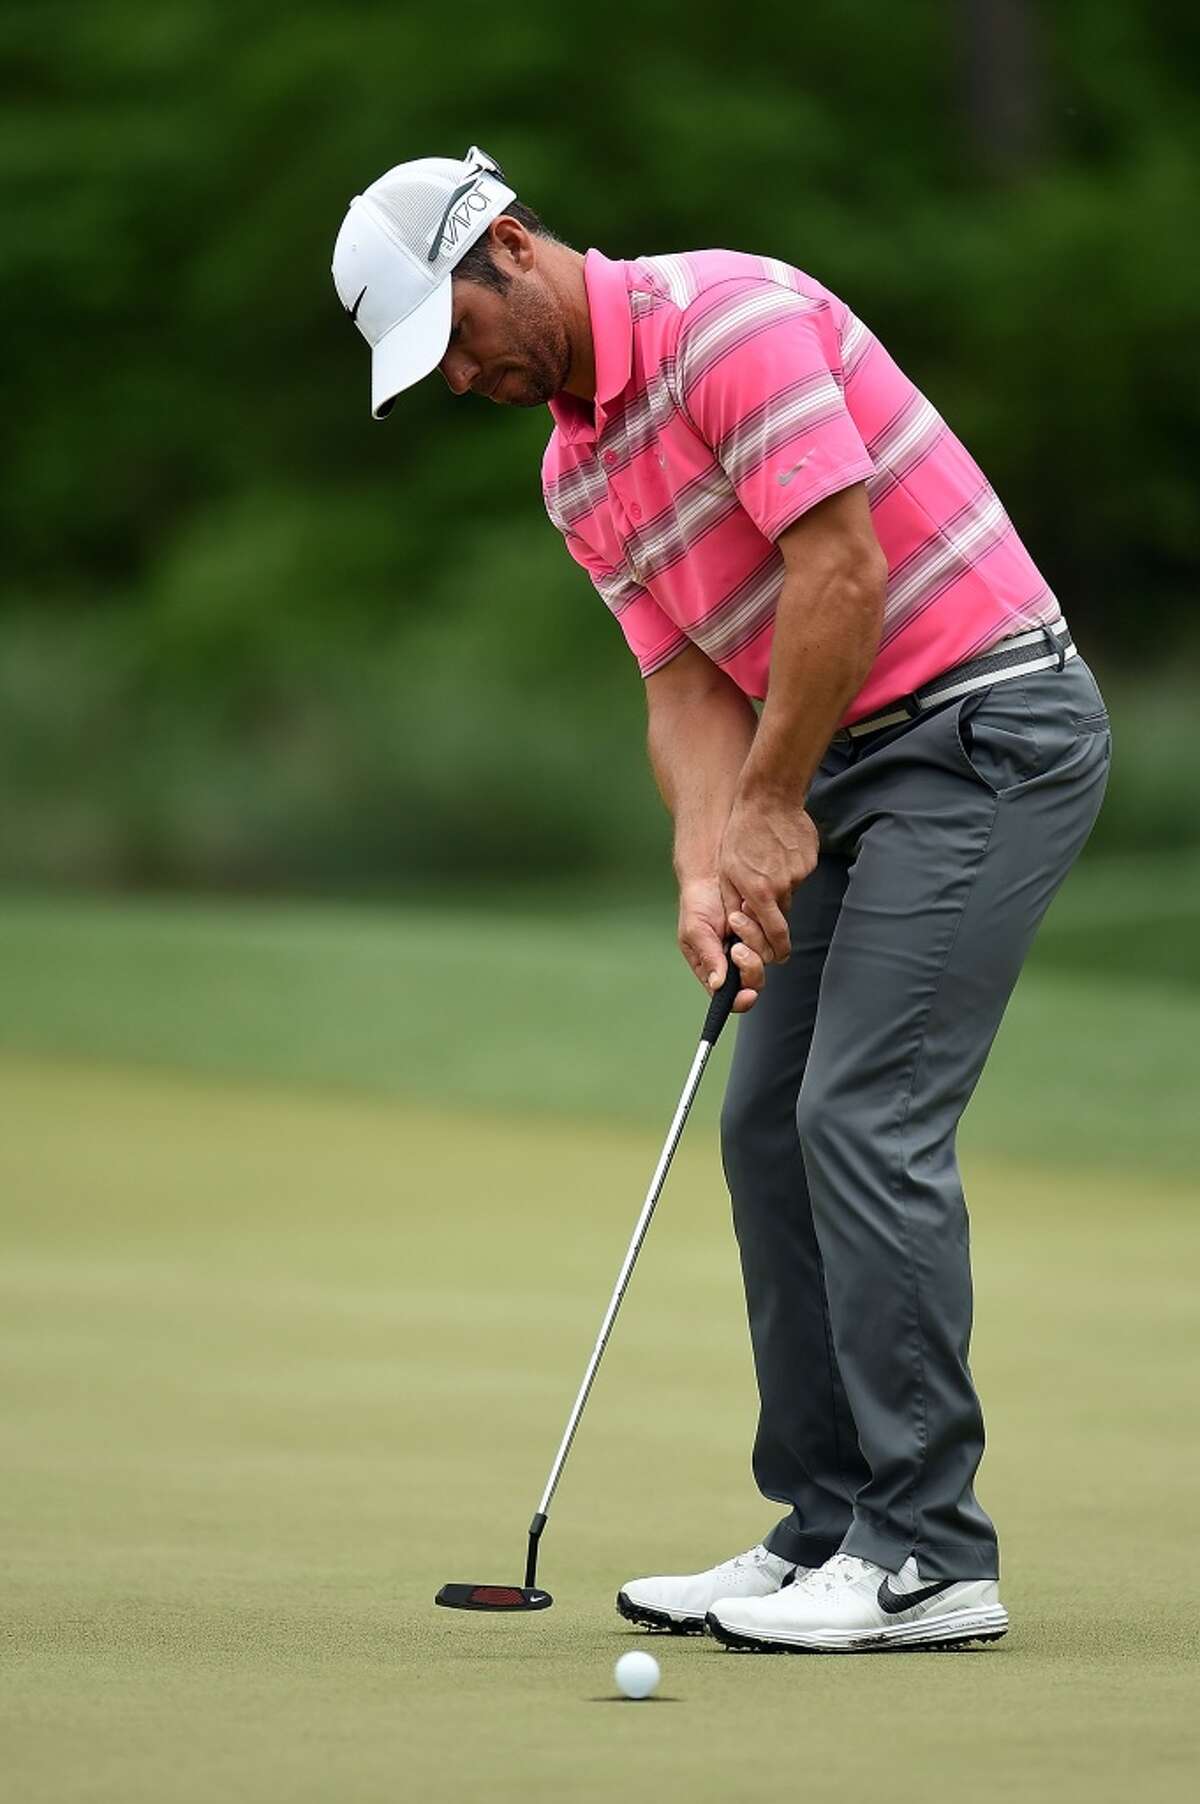 HUMBLE, TX - APRIL 03: Paul Casey of England putts on the thirteenth hole during the second round of the Shell Houston Open at the Golf Club of Houston on April 3, 2015 in Humble, Texas. (Photo by Stacy Revere/Getty Images)